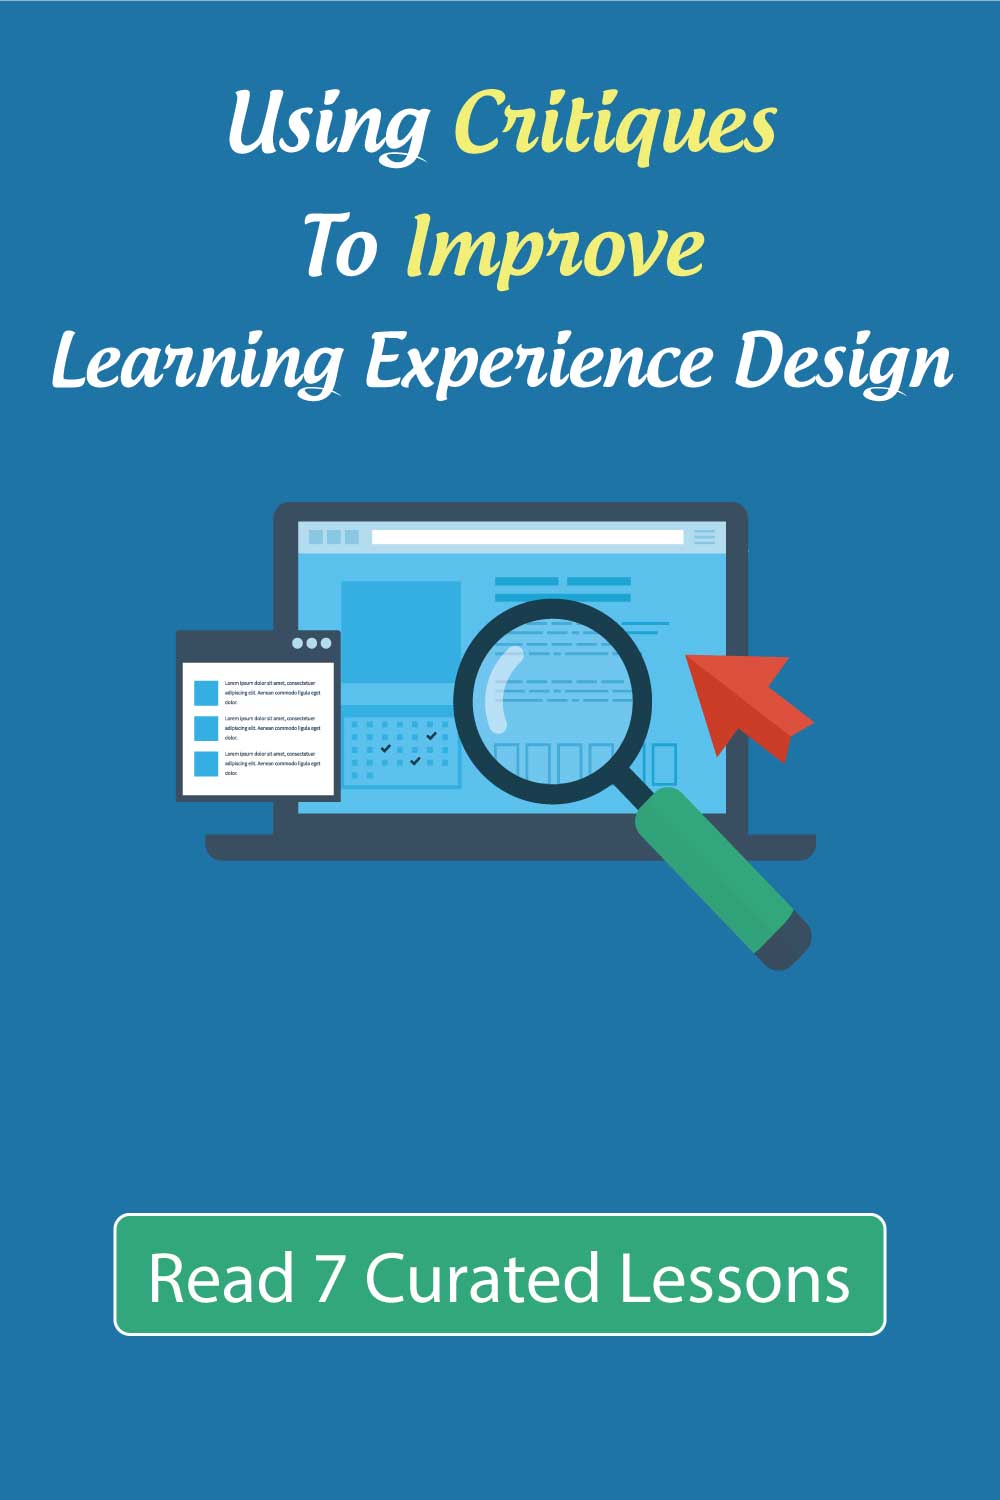 Using Critiques To Improve Learning Experience Design